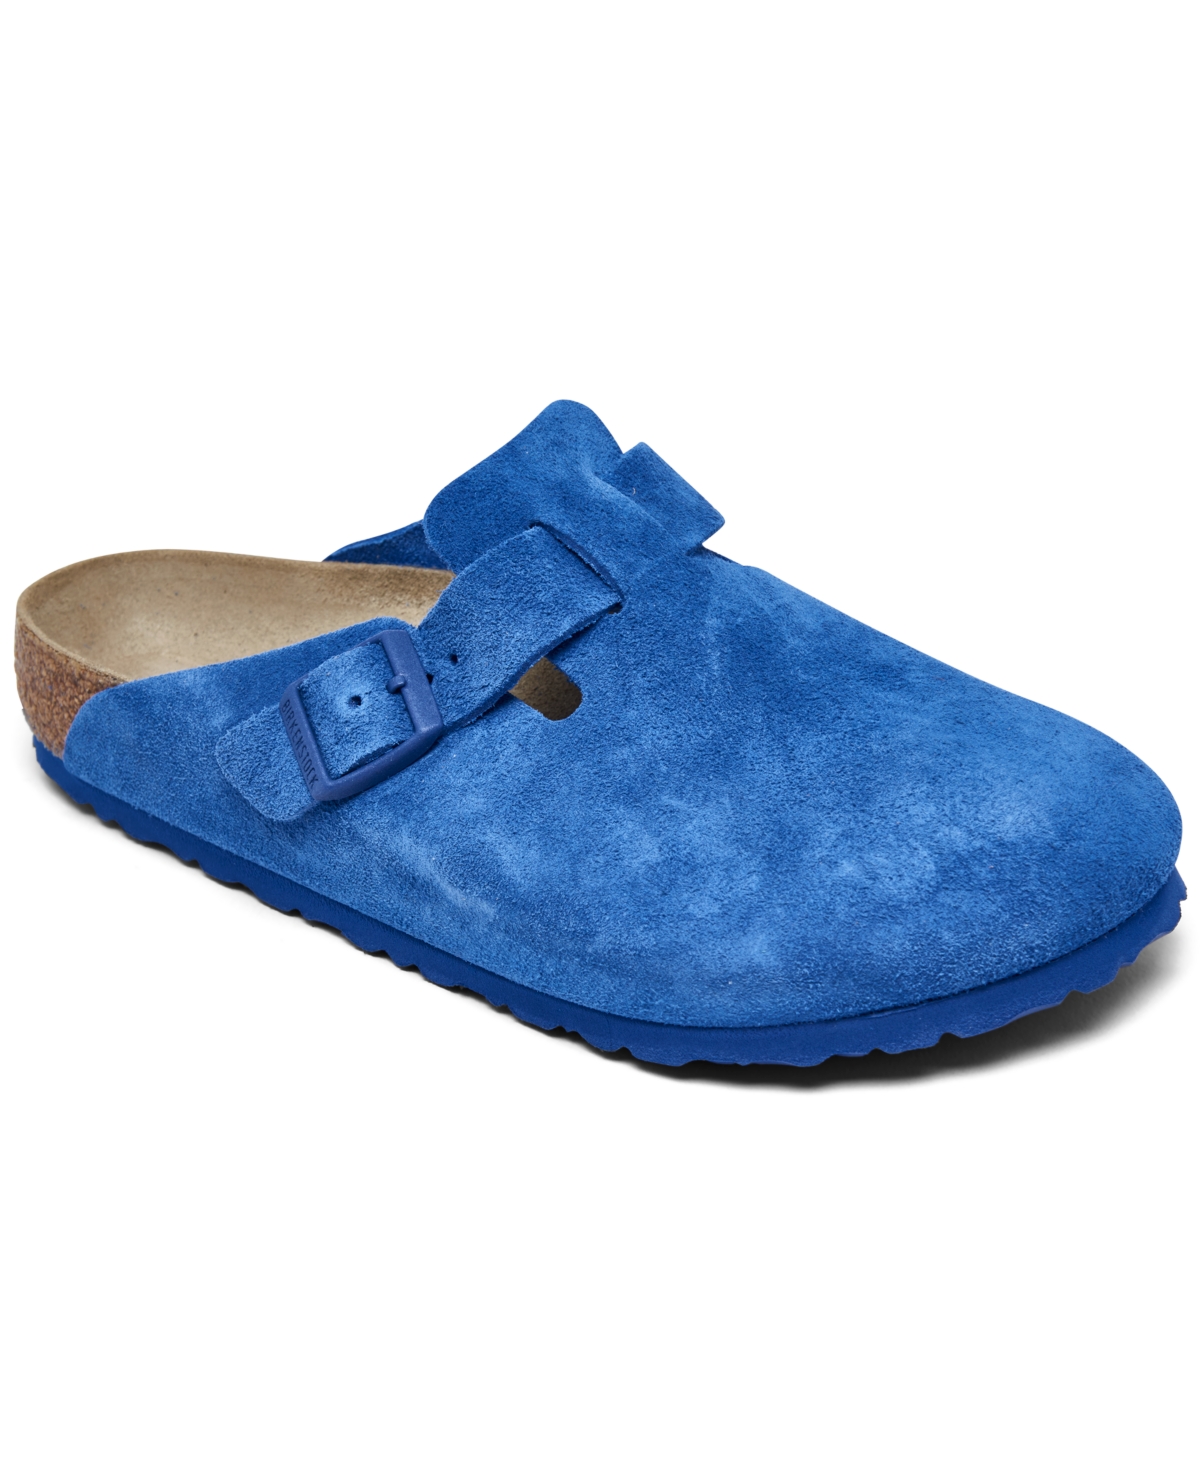 Men's Boston Suede Leather Clogs from Finish Line - Blue